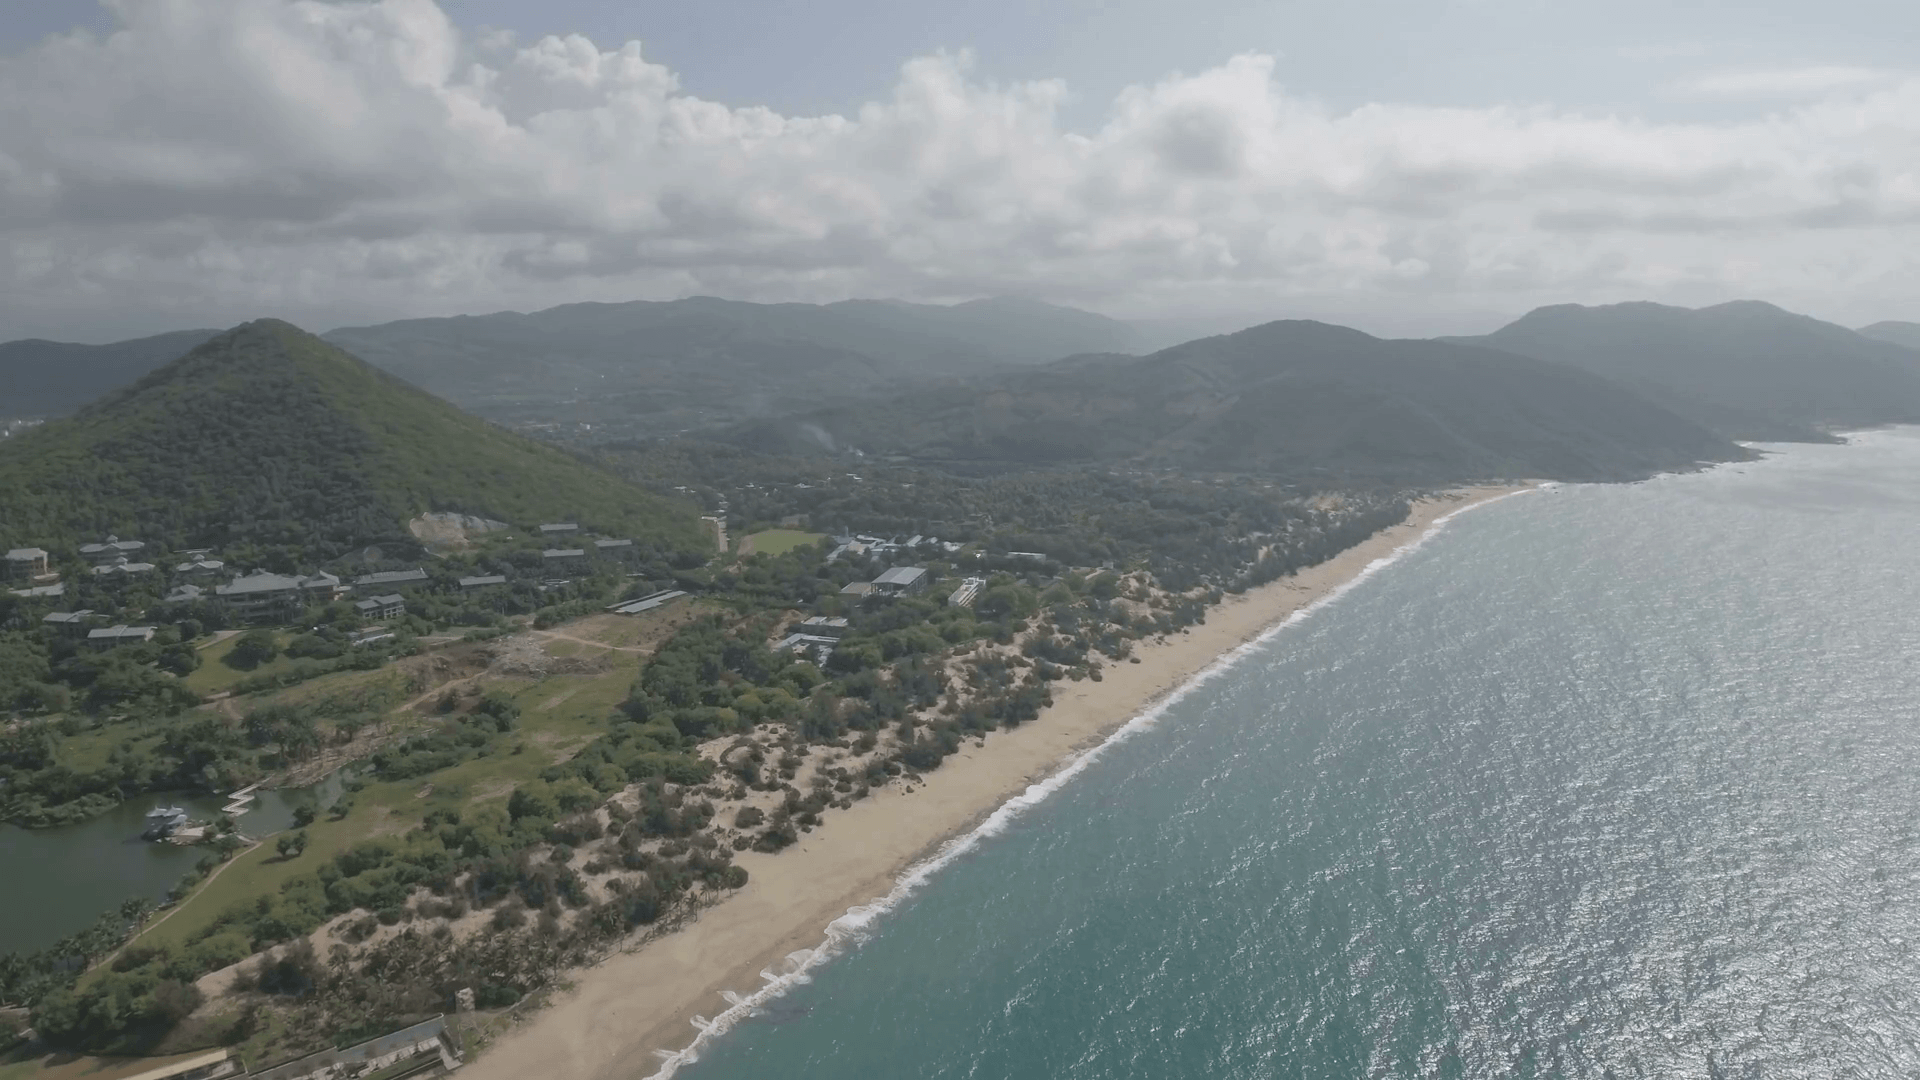 Aerial view of the mountain landscape and coastline of beautiful